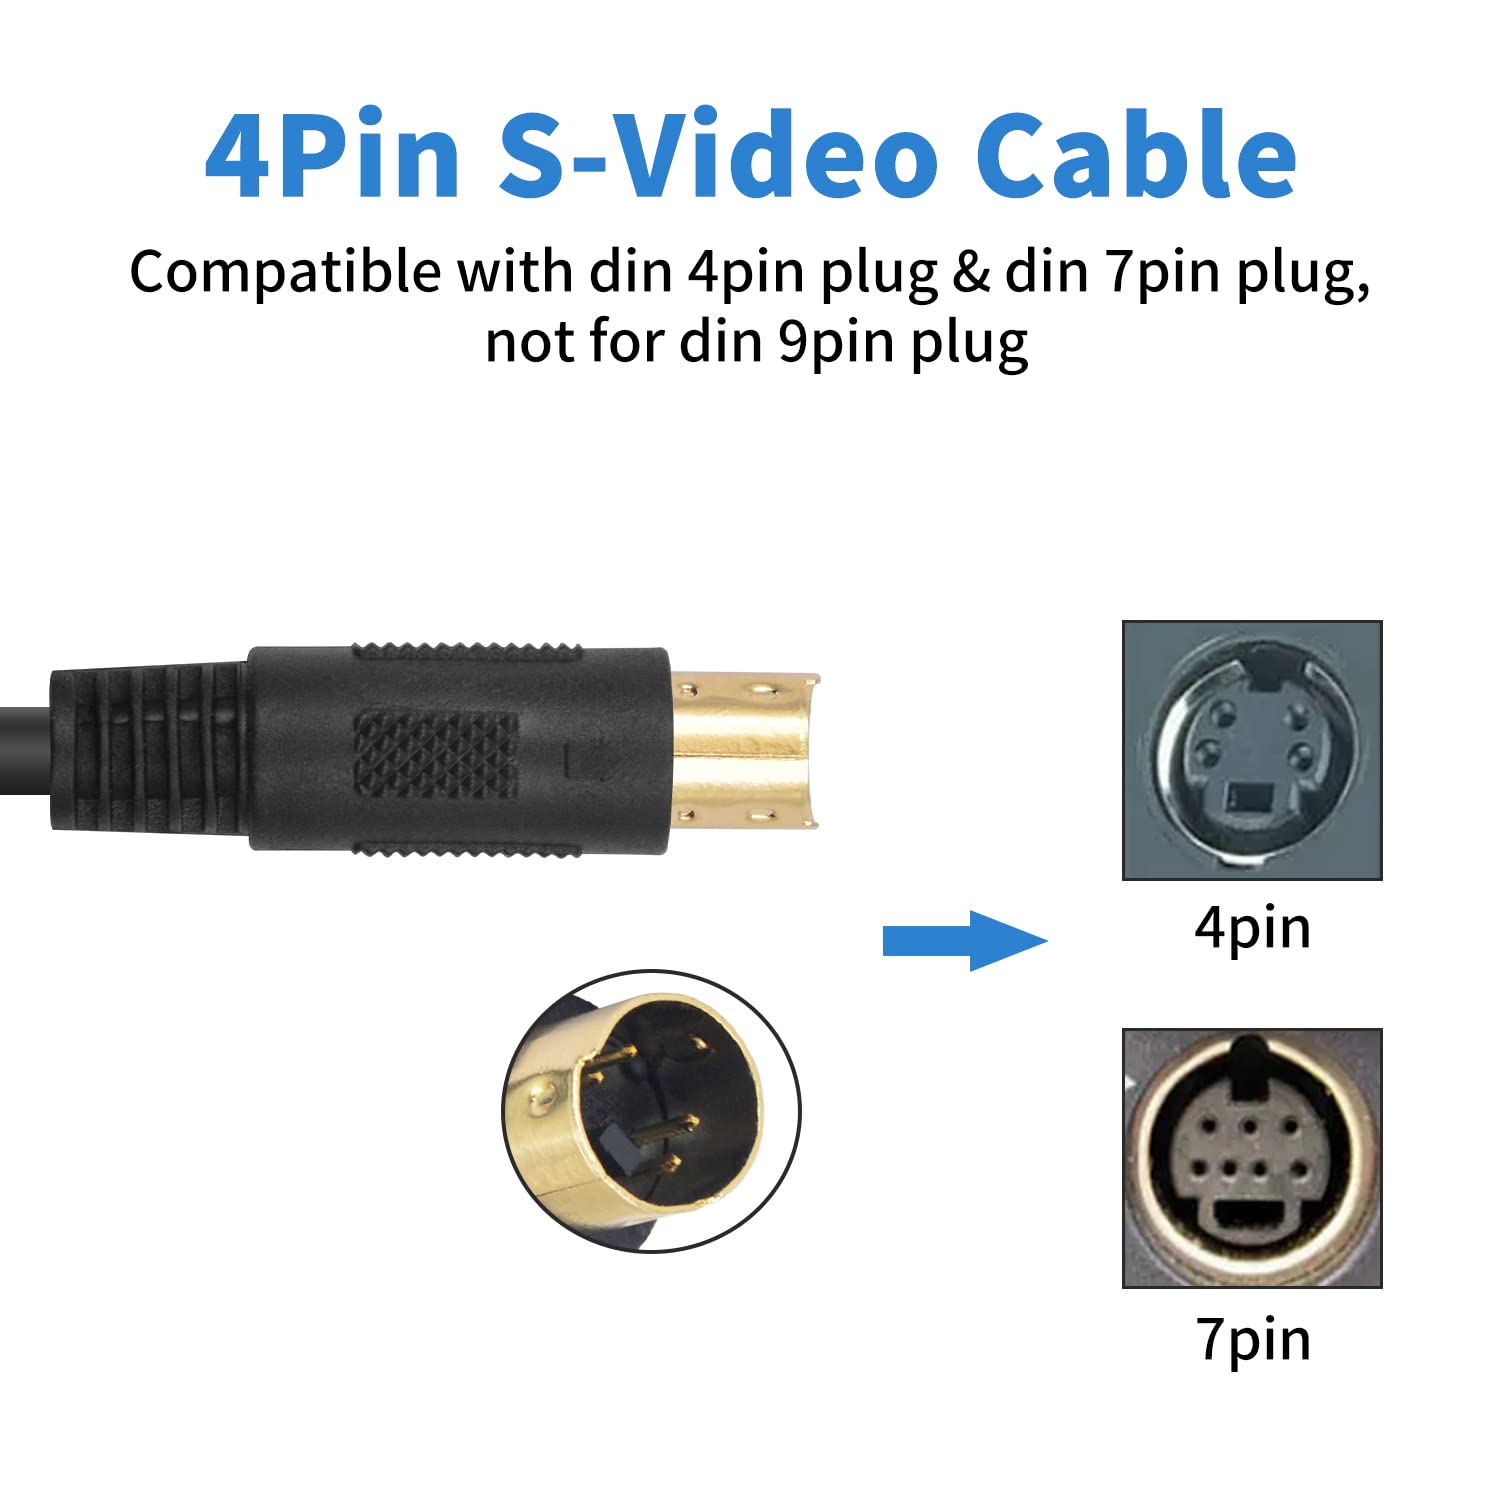 Poyiccot S-Video Cable, 3.3ft Mini DIN 4 Pin S-Video Cable Male to Male Gold Plated Mini DIN 4 Pin Connector Compatible with DVD Player, Home Theater, DSS receivers, VCRs, DVRs/PVRs